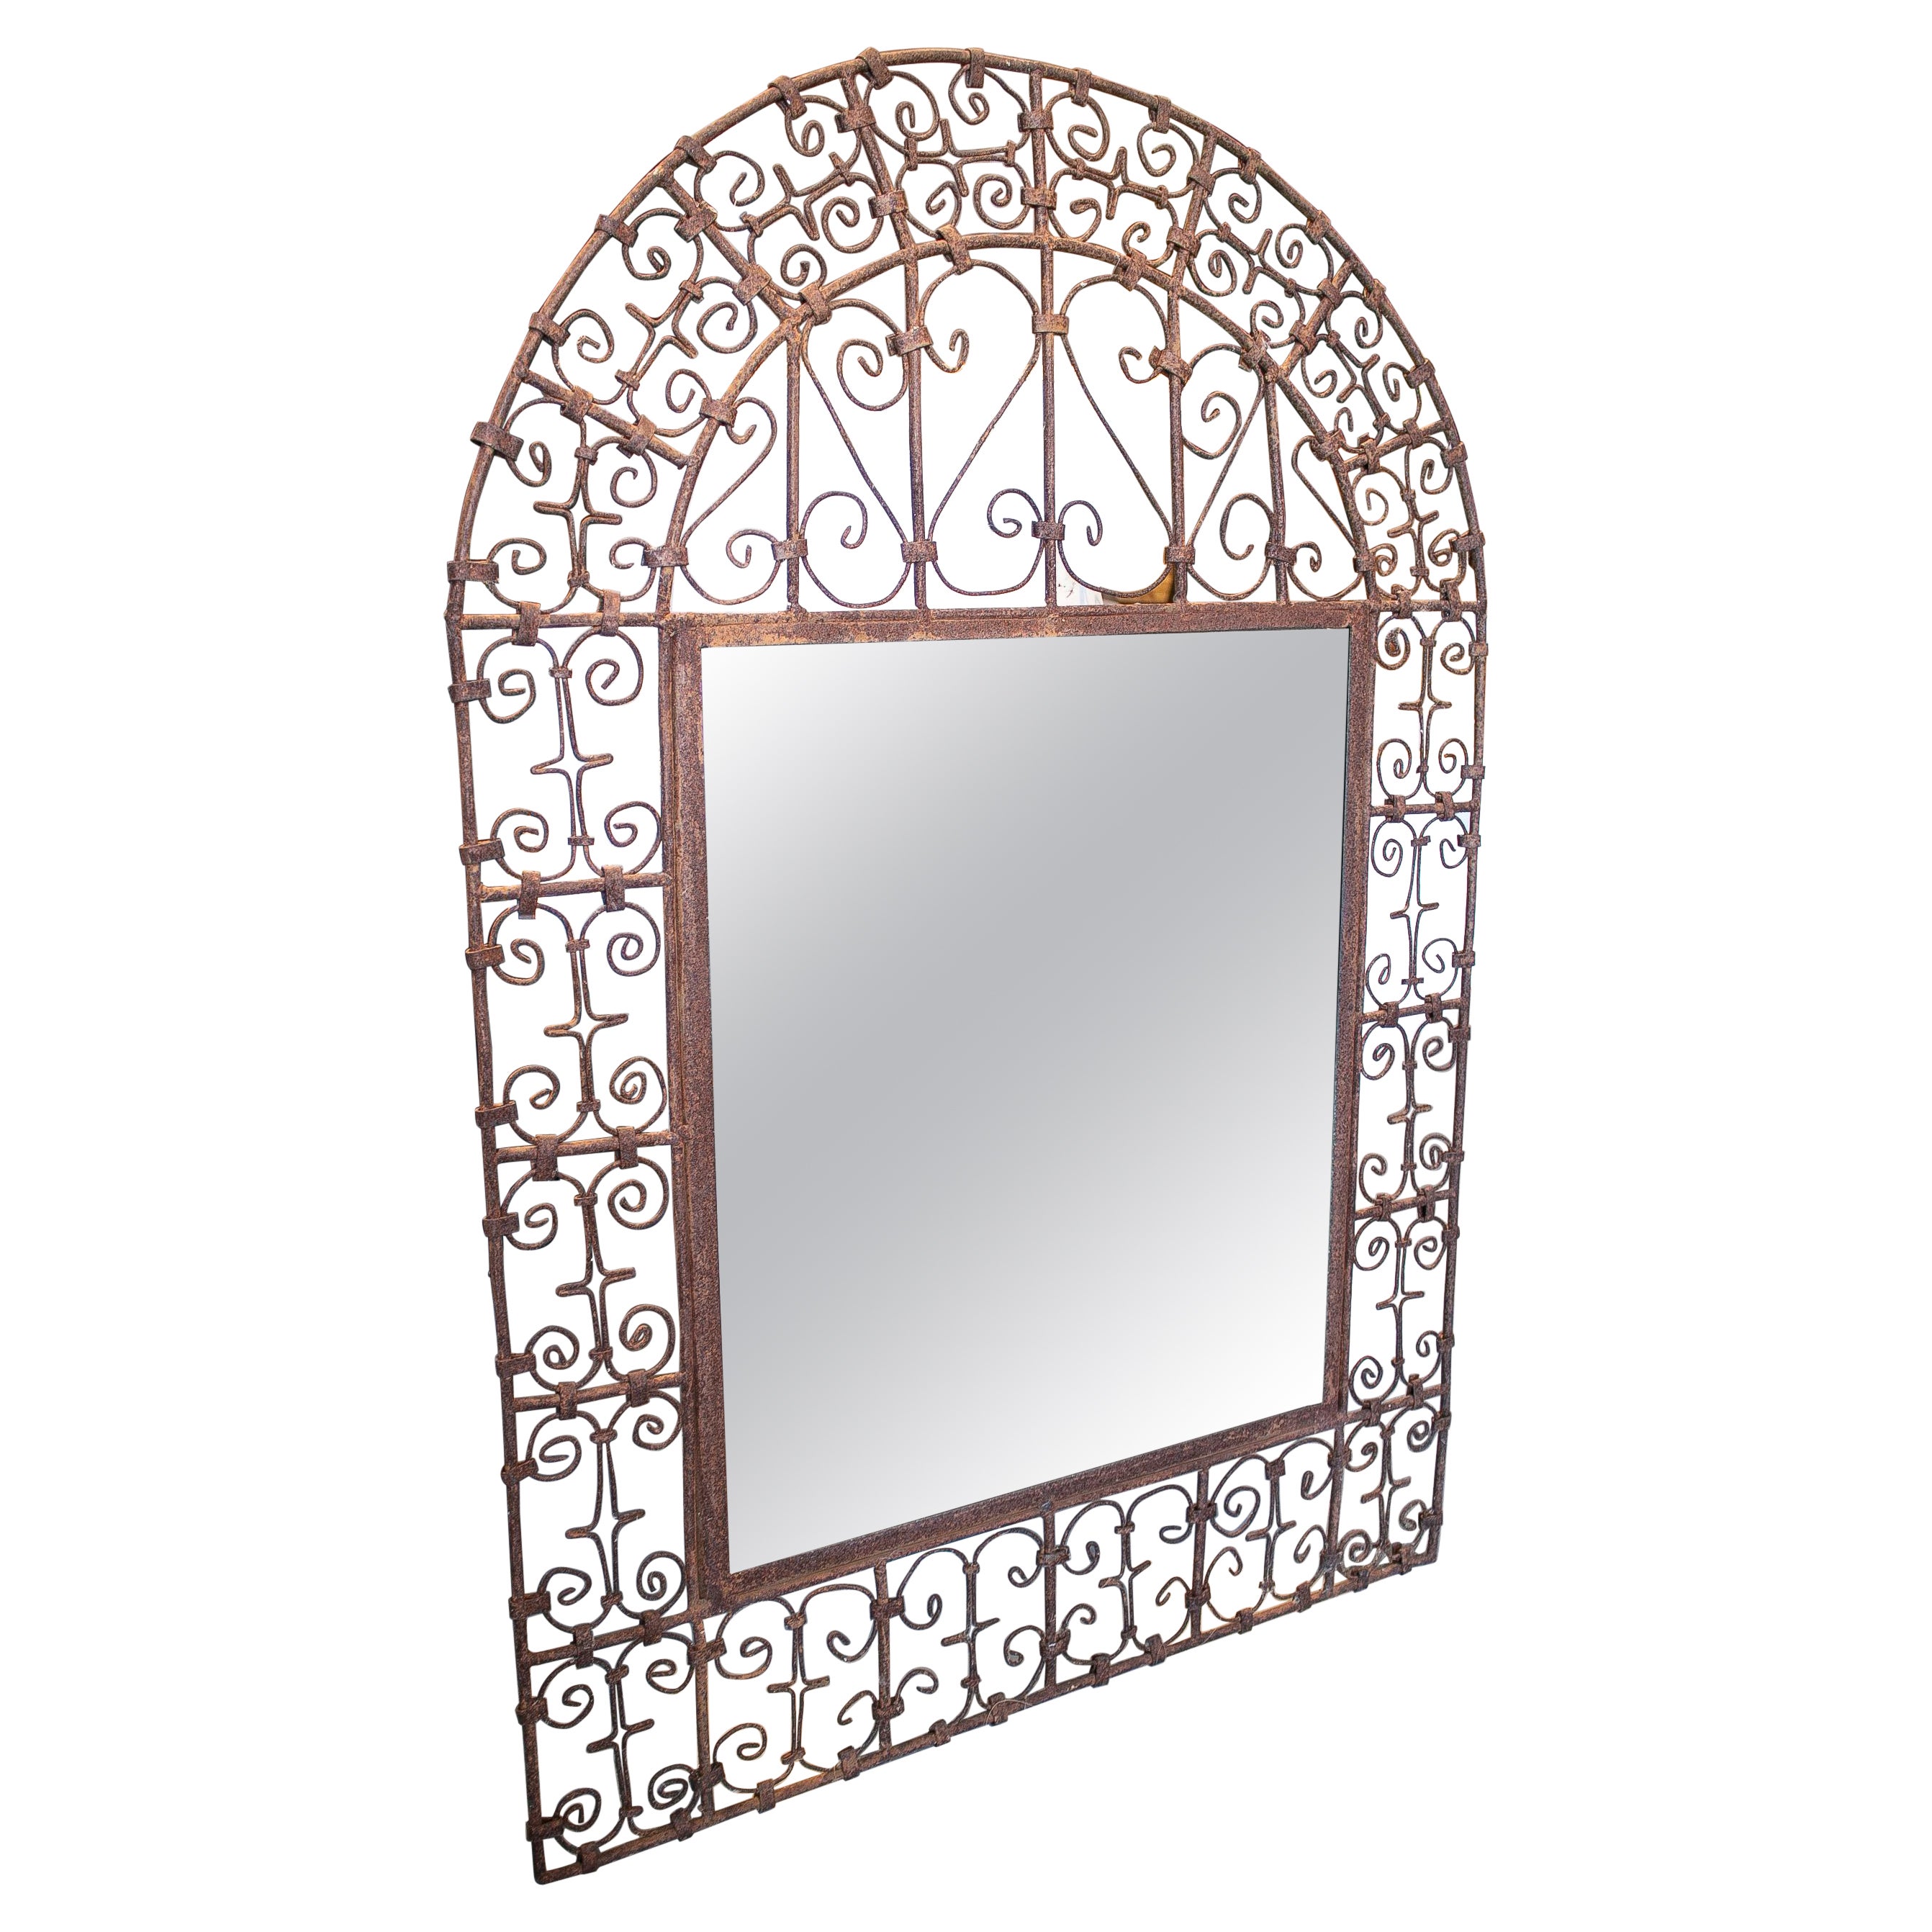 1970s Spanish Iron Wall Mirror For Sale